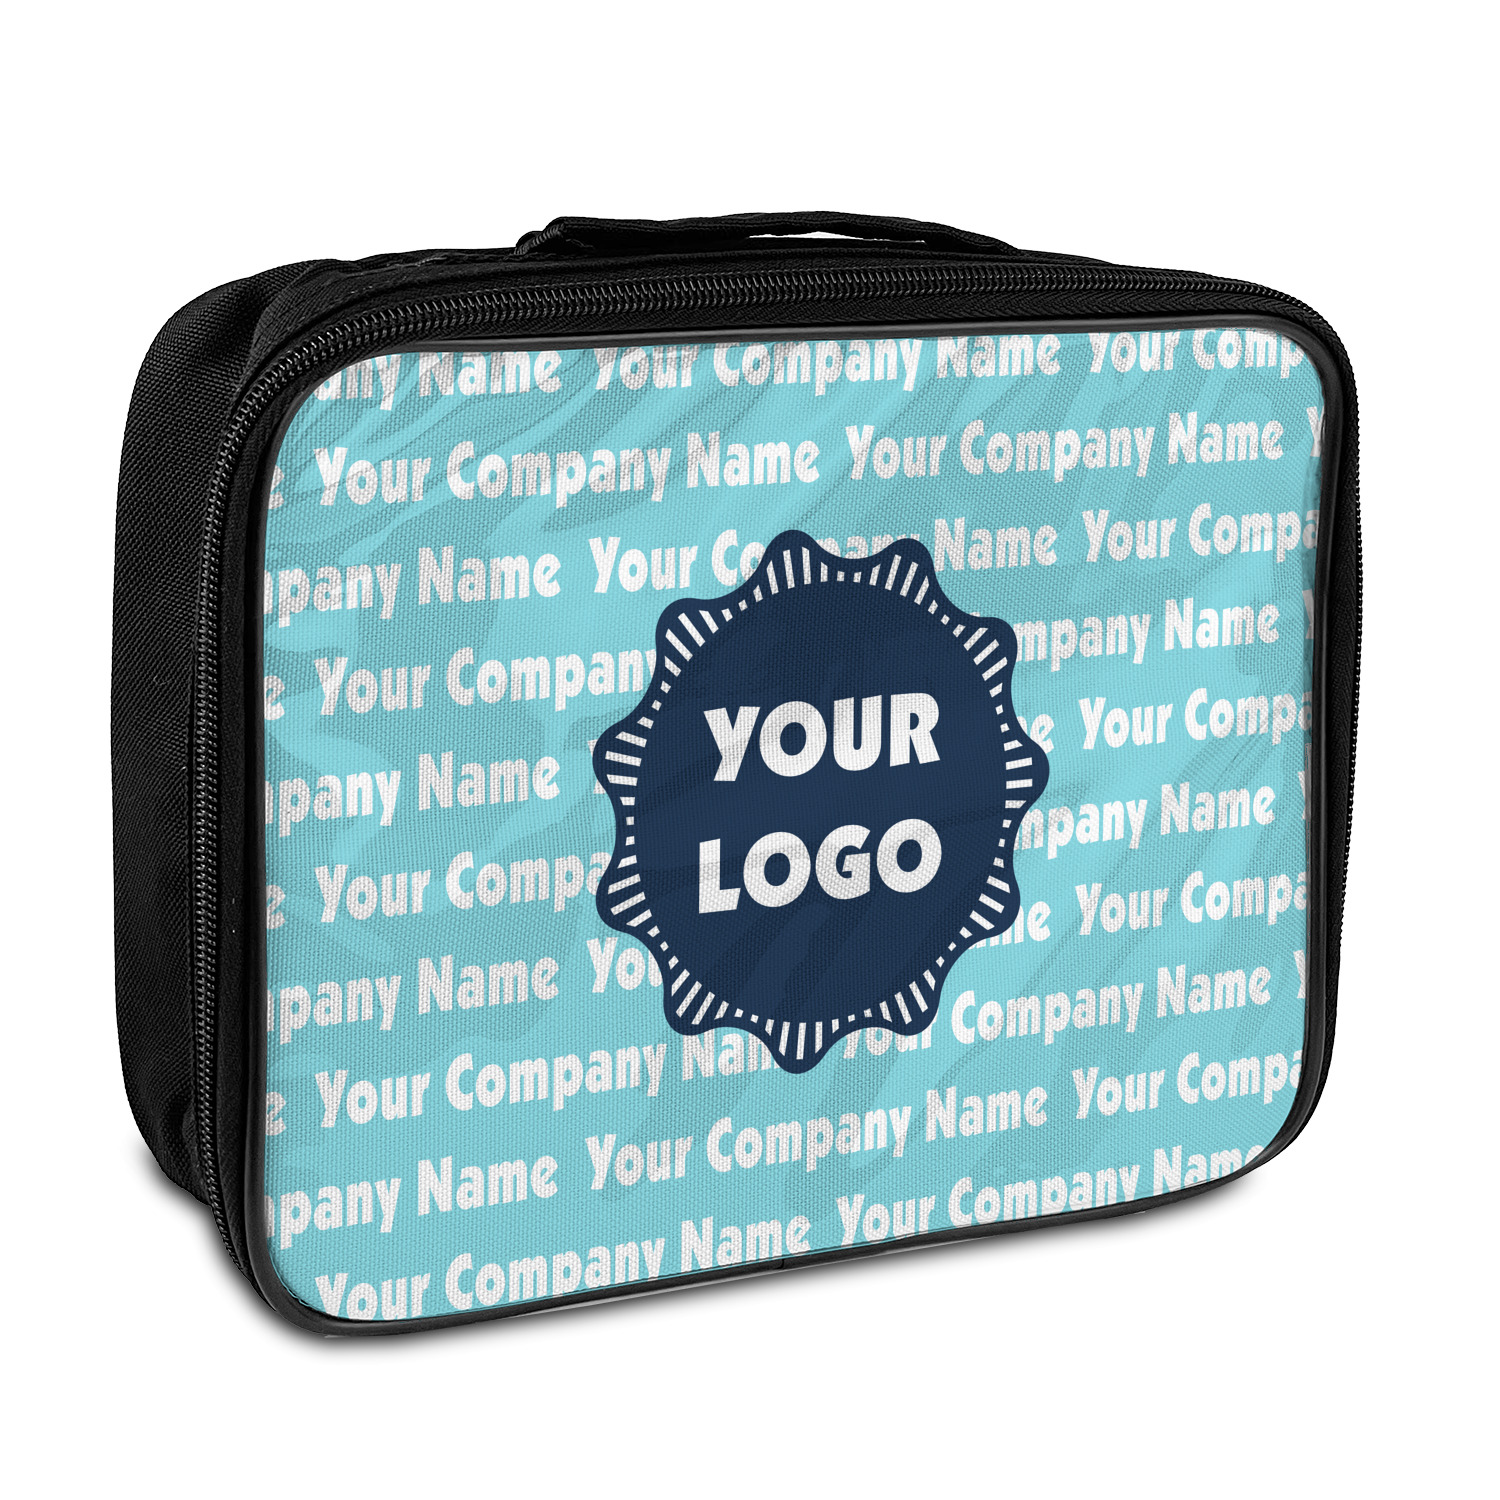 https://www.youcustomizeit.com/common/MAKE/638421/Logo-Company-Name-Insulated-Lunch-Bag-Personalized.jpg?lm=1686953003